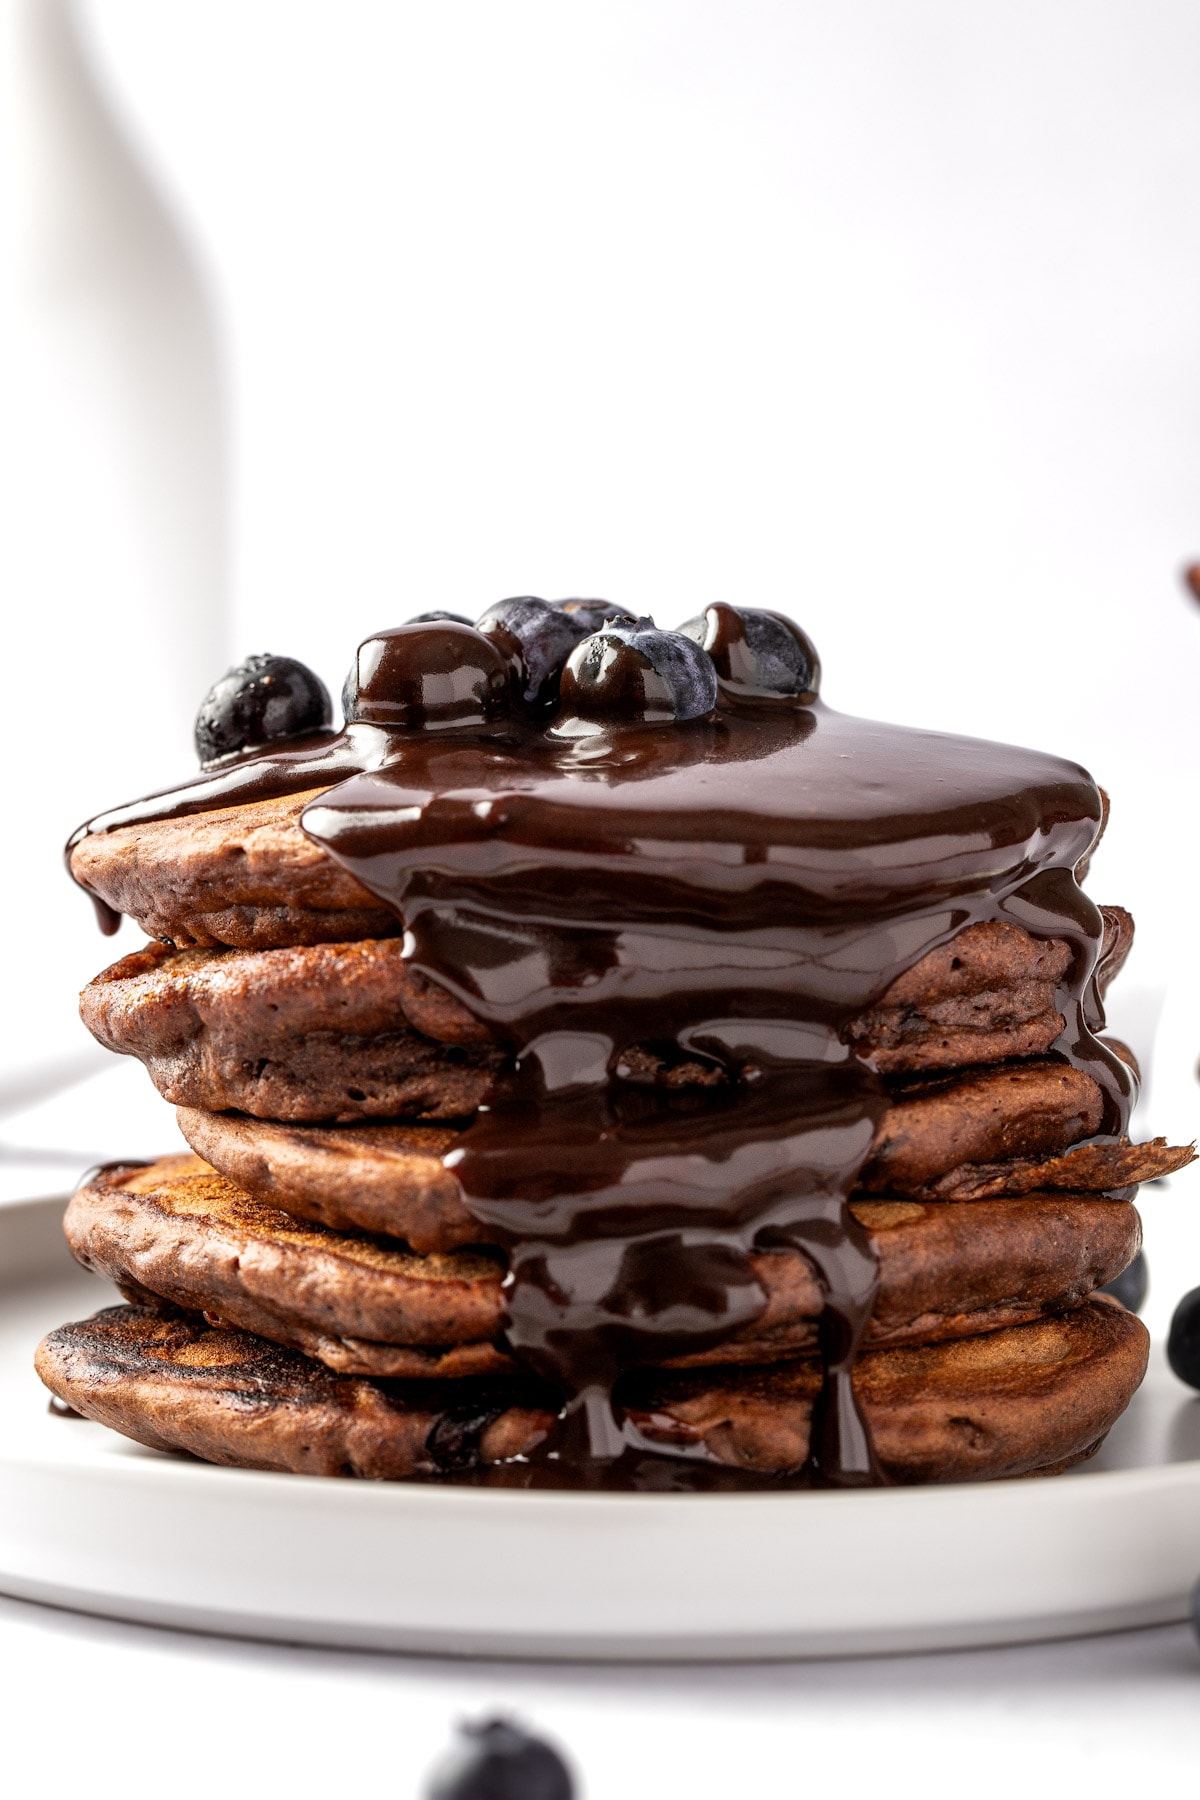 Eye level view of a stack of chai spiced pancakes drizzled with chocolate sauce, on a white plate.